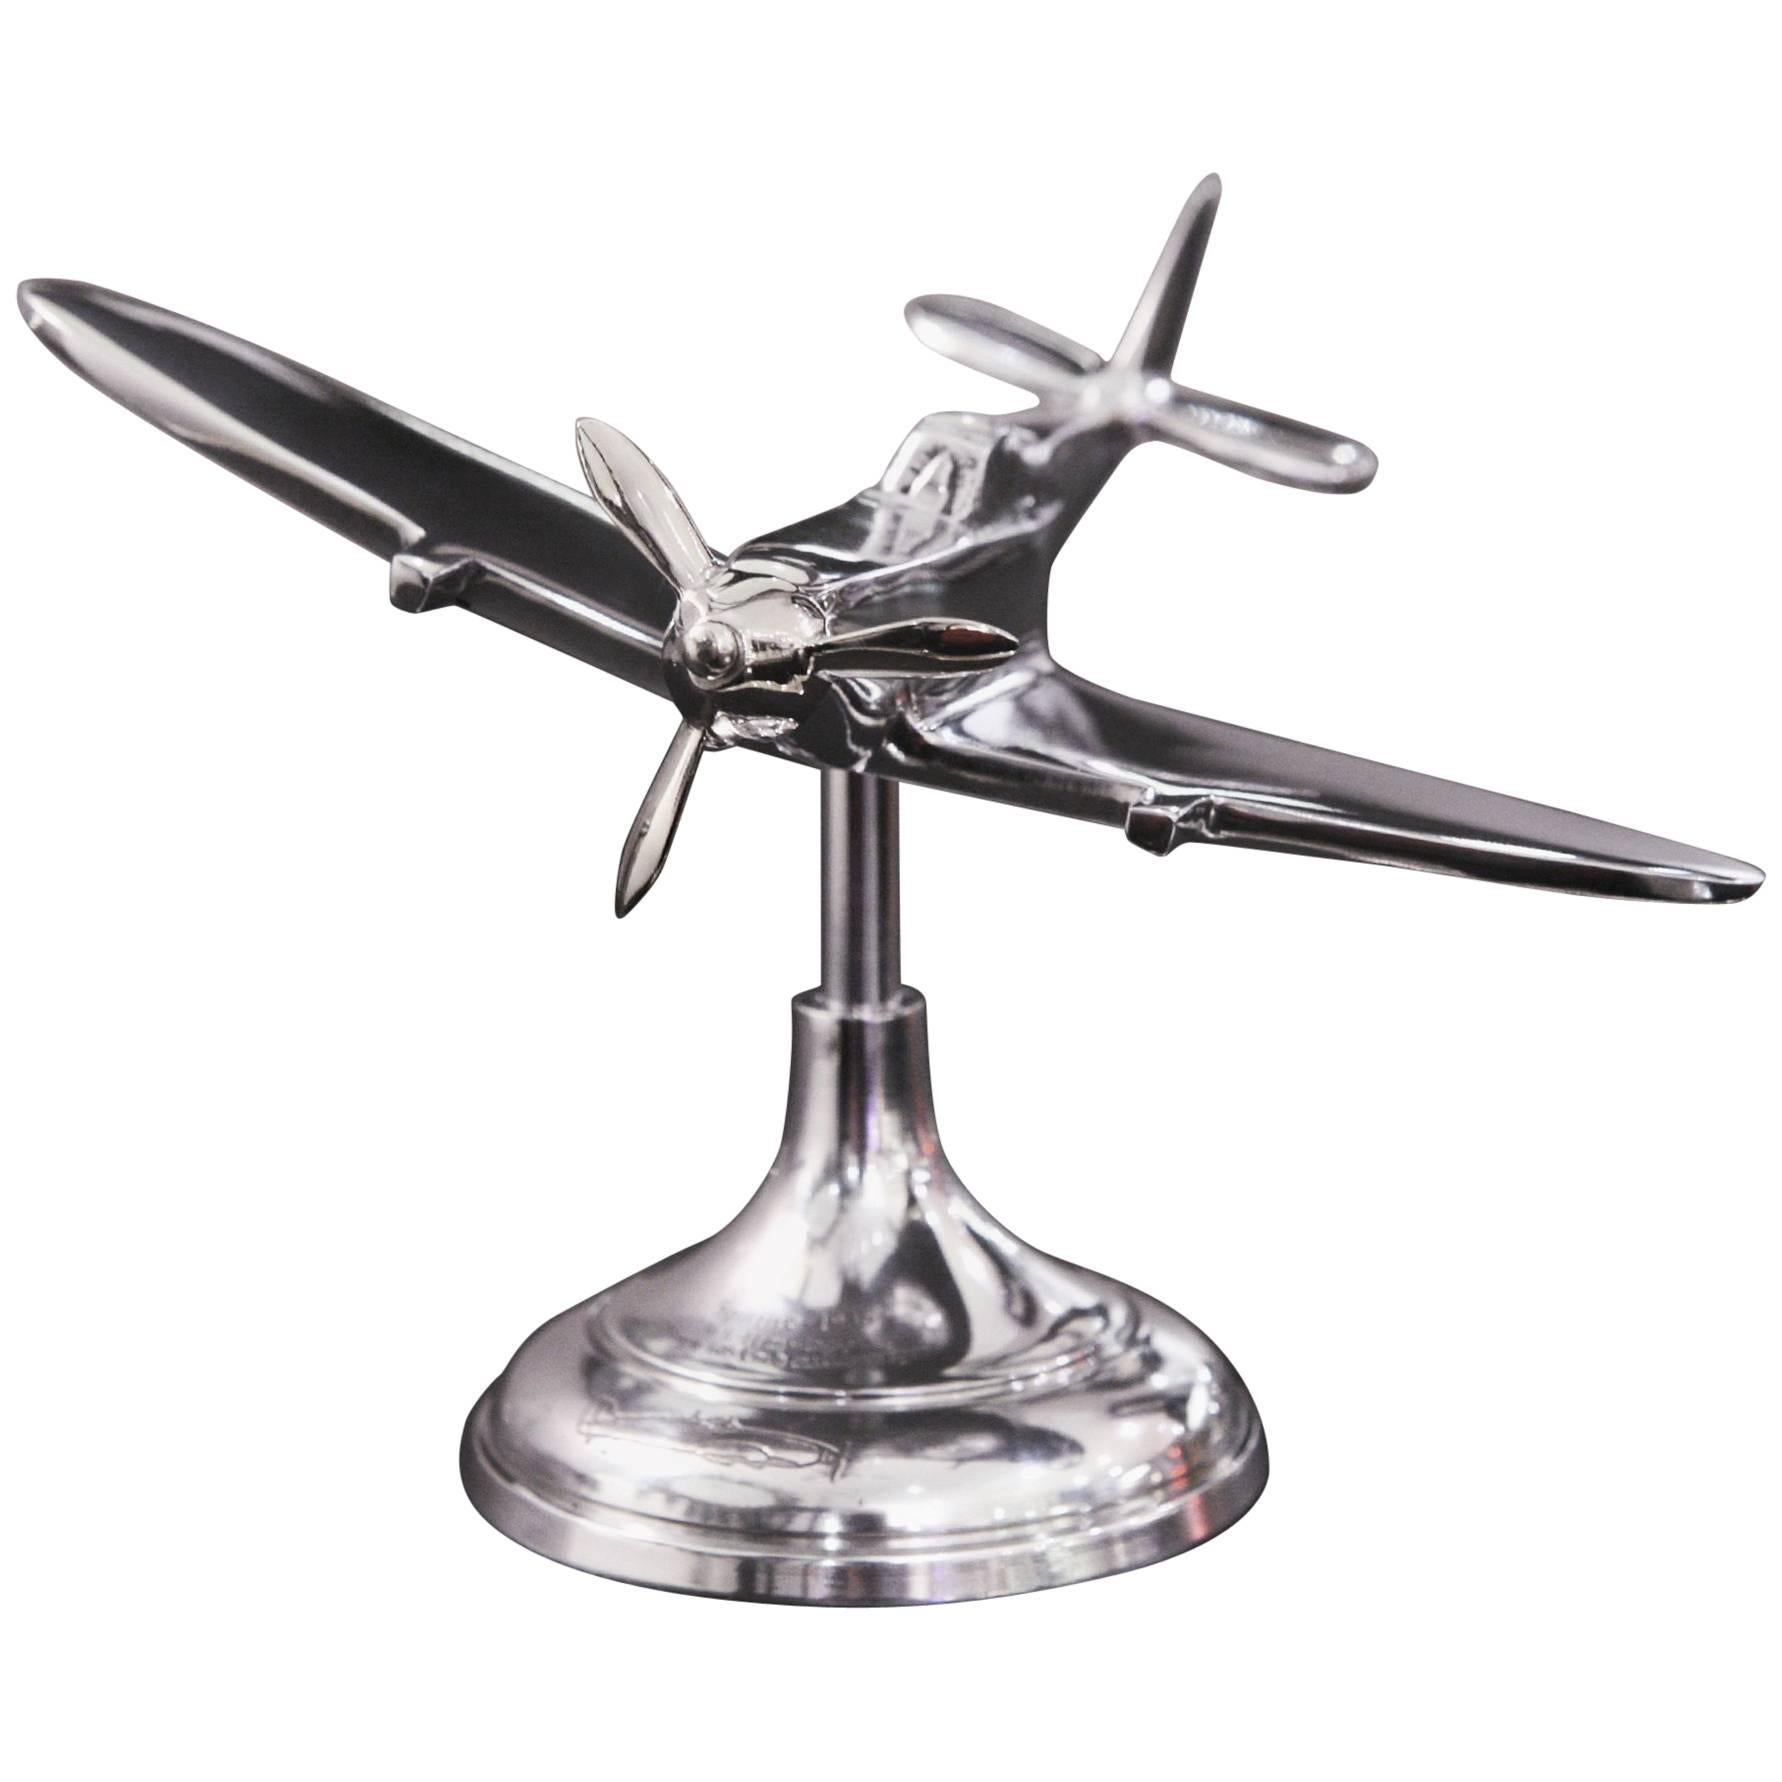 Spitfire Model on Stand in Aluminium Silver Polished